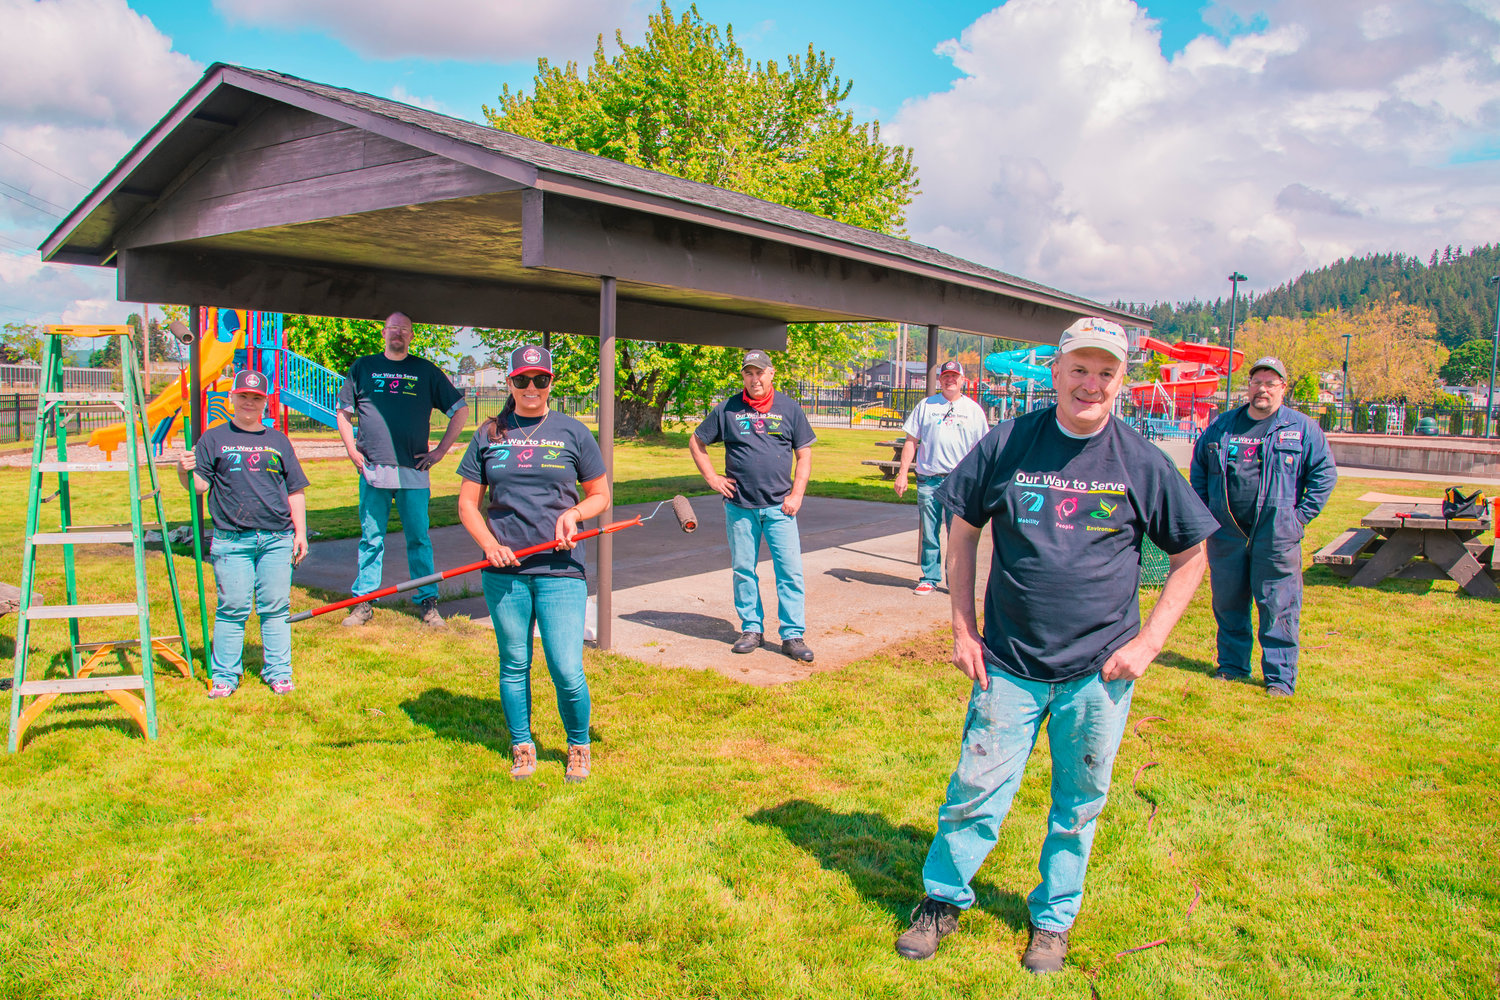 From left to right, Angela Henderson, Jesse Coffman, Amanda Hubbert, Darren Soares, Donny McReynolds, Larry Barstow, and Dary Estep, with GCR Tires and Service, pose for a photo in Chehalis after painting a covered area at the park near the Gail and Carolyn Shaw Aquatics Center Wednesday morning during their third community based project.